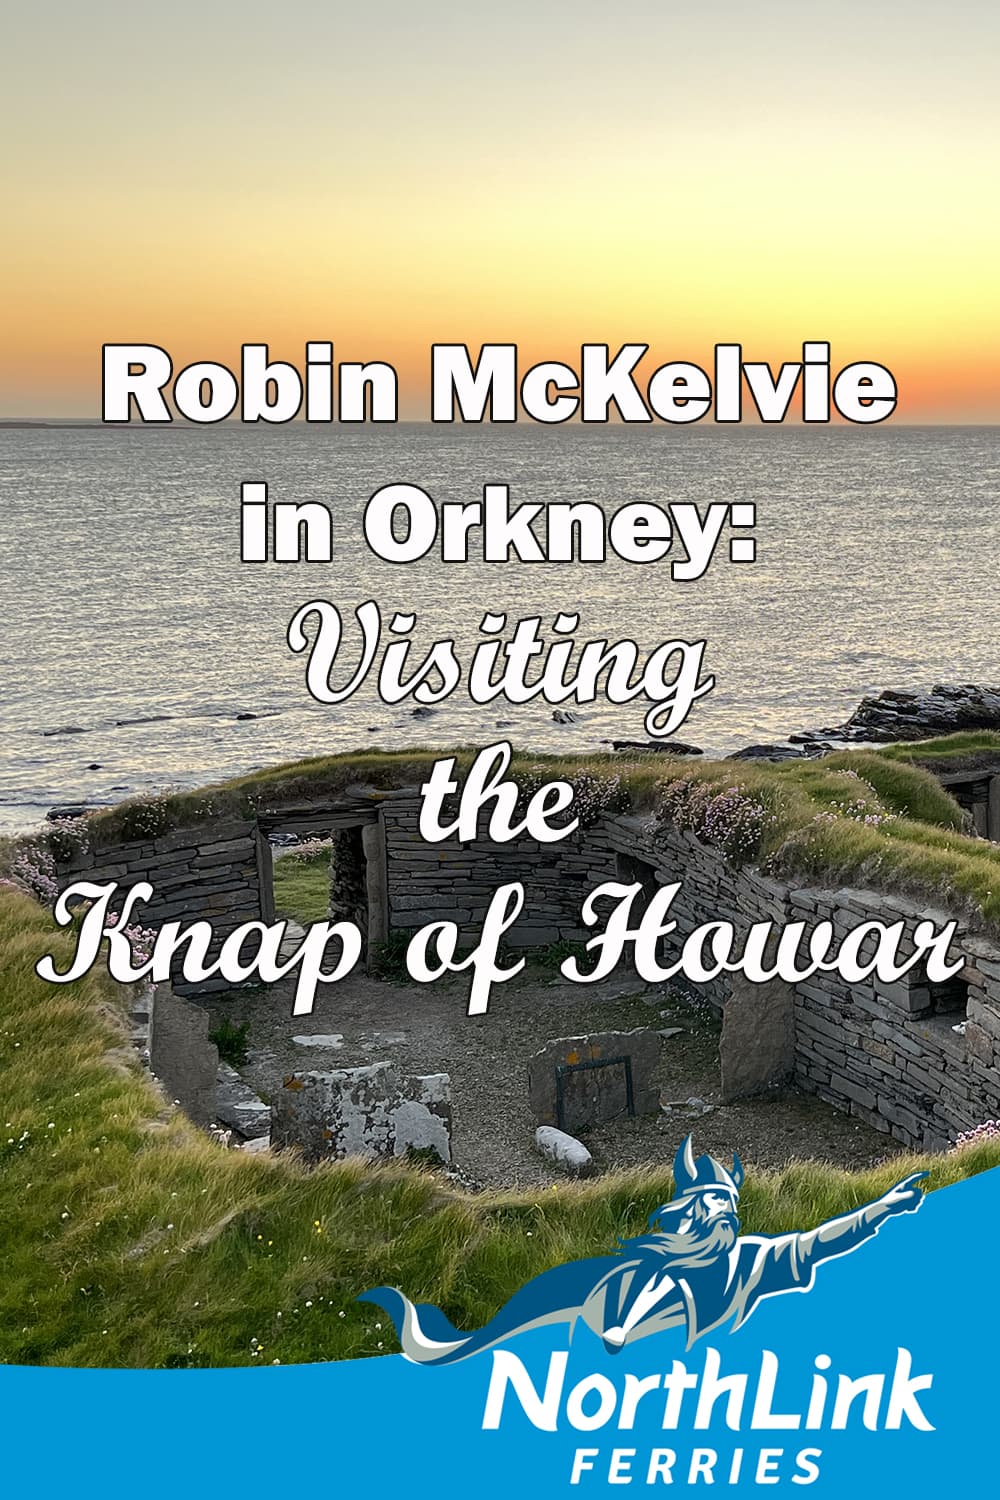 Robin McKelvie in Orkney: Embracing winter in the northern isles